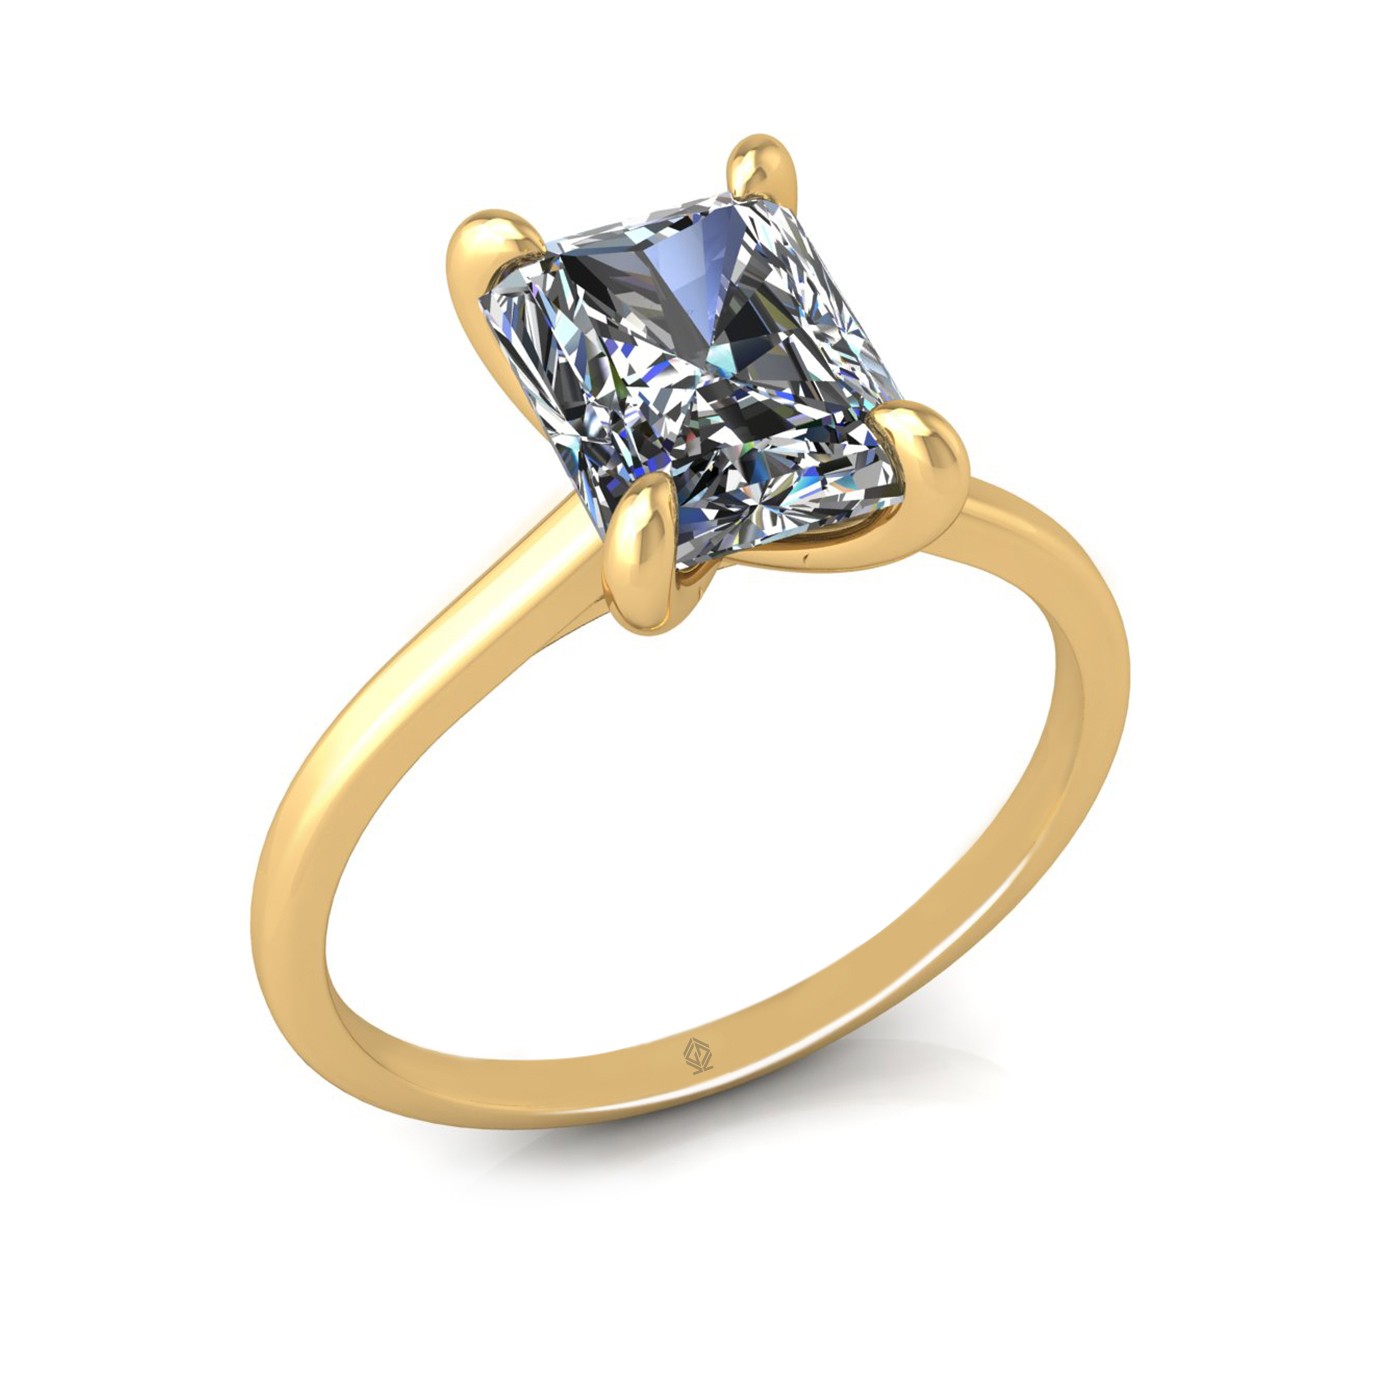 18k yellow gold  2,50 ct 4 prongs solitaire radiant cut diamond engagement ring with whisper thin band